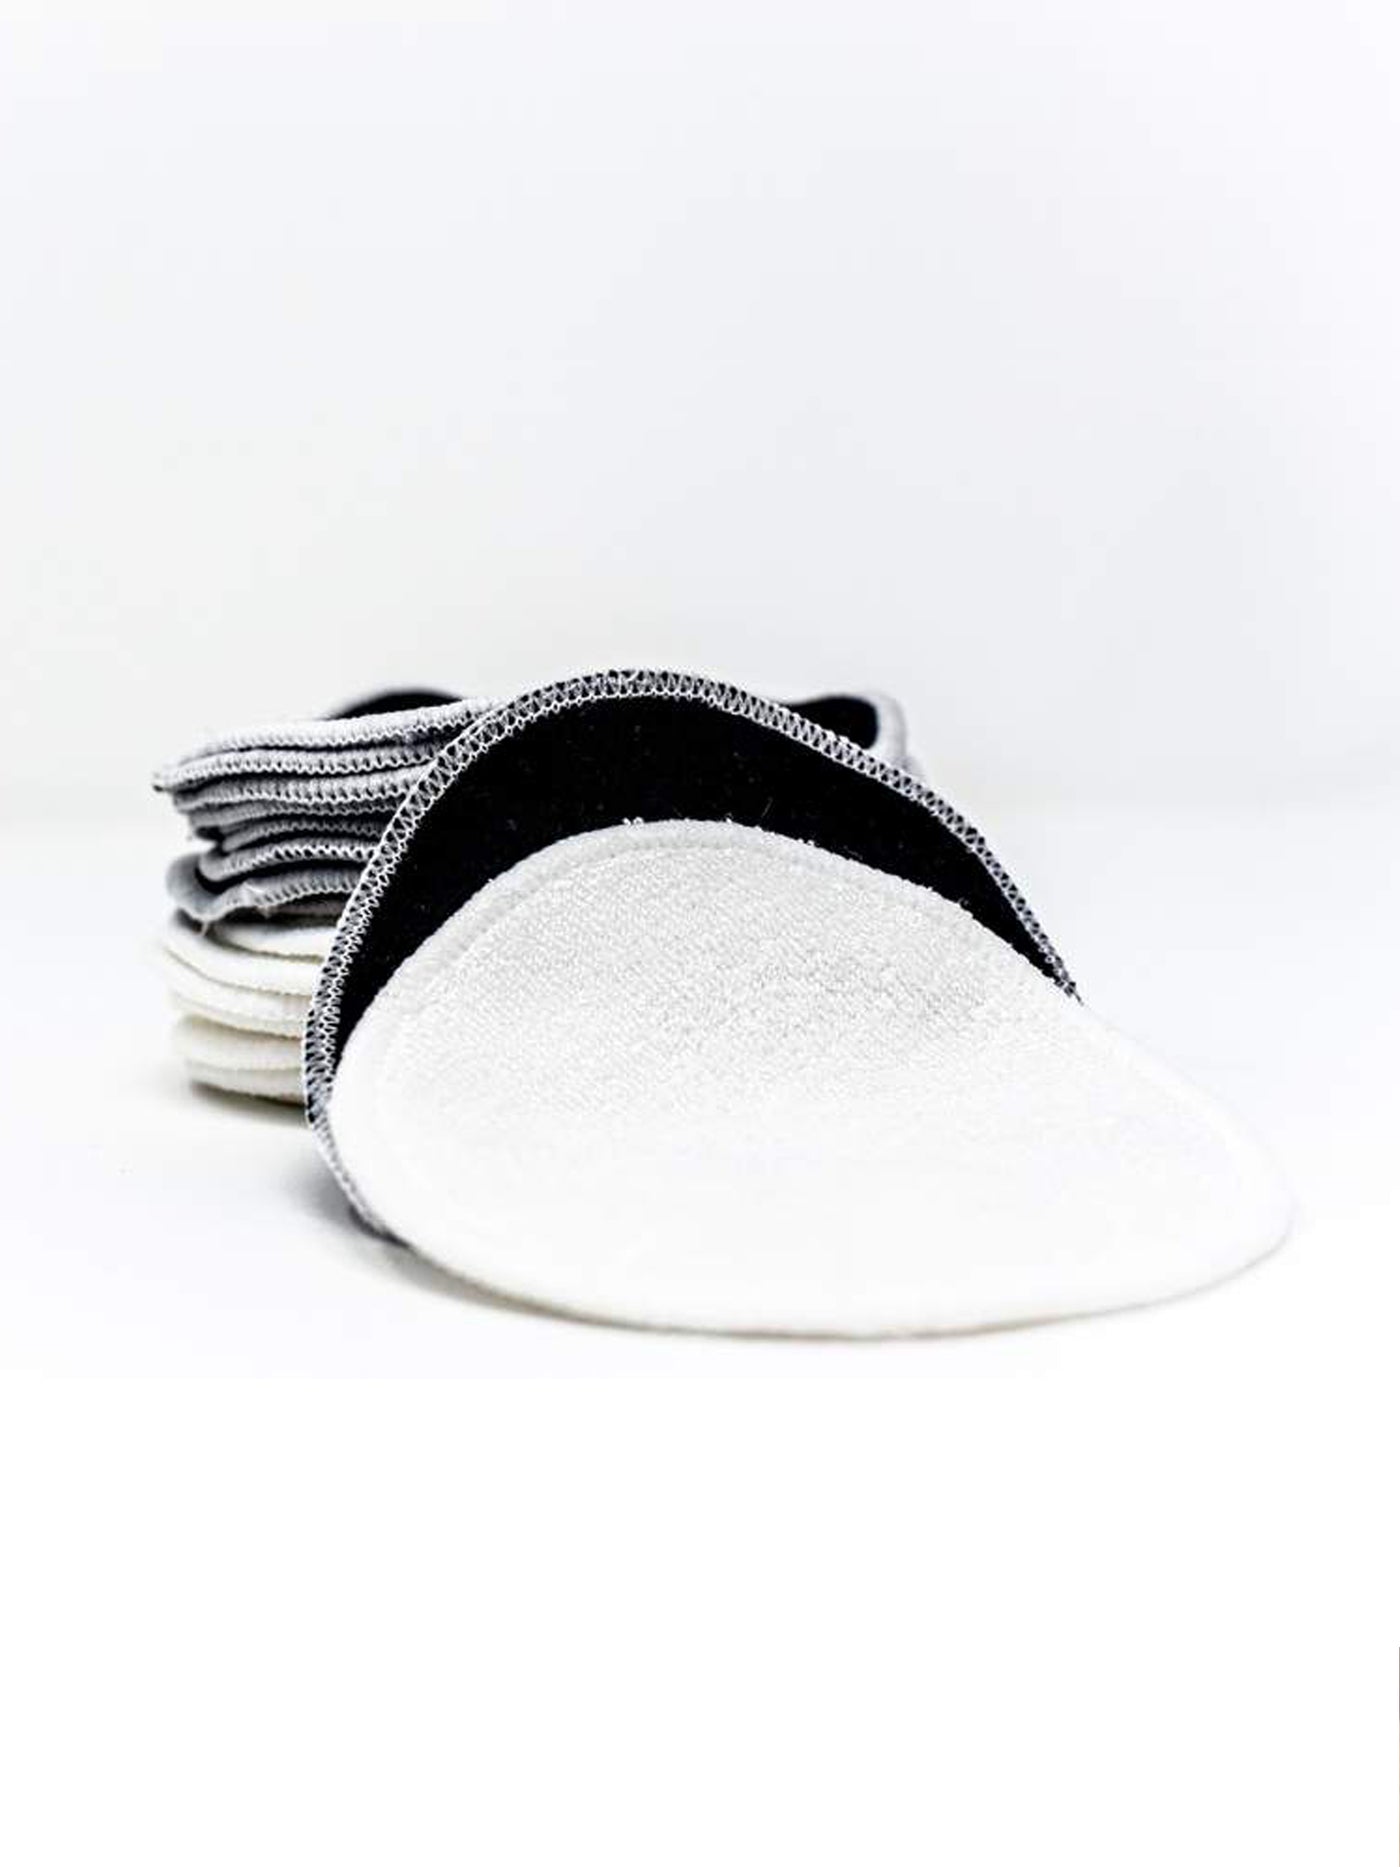 Reusable facial rounds are an environmentally friendly, zero-waste staple for your daily skincare routine. 10 Black Cotton for removing dark eye makeup or applying facial toner and 10 White Bamboo Terry that has a soft, textured surface to remove hard to clean makeup or to apply exfoliating cleanser.